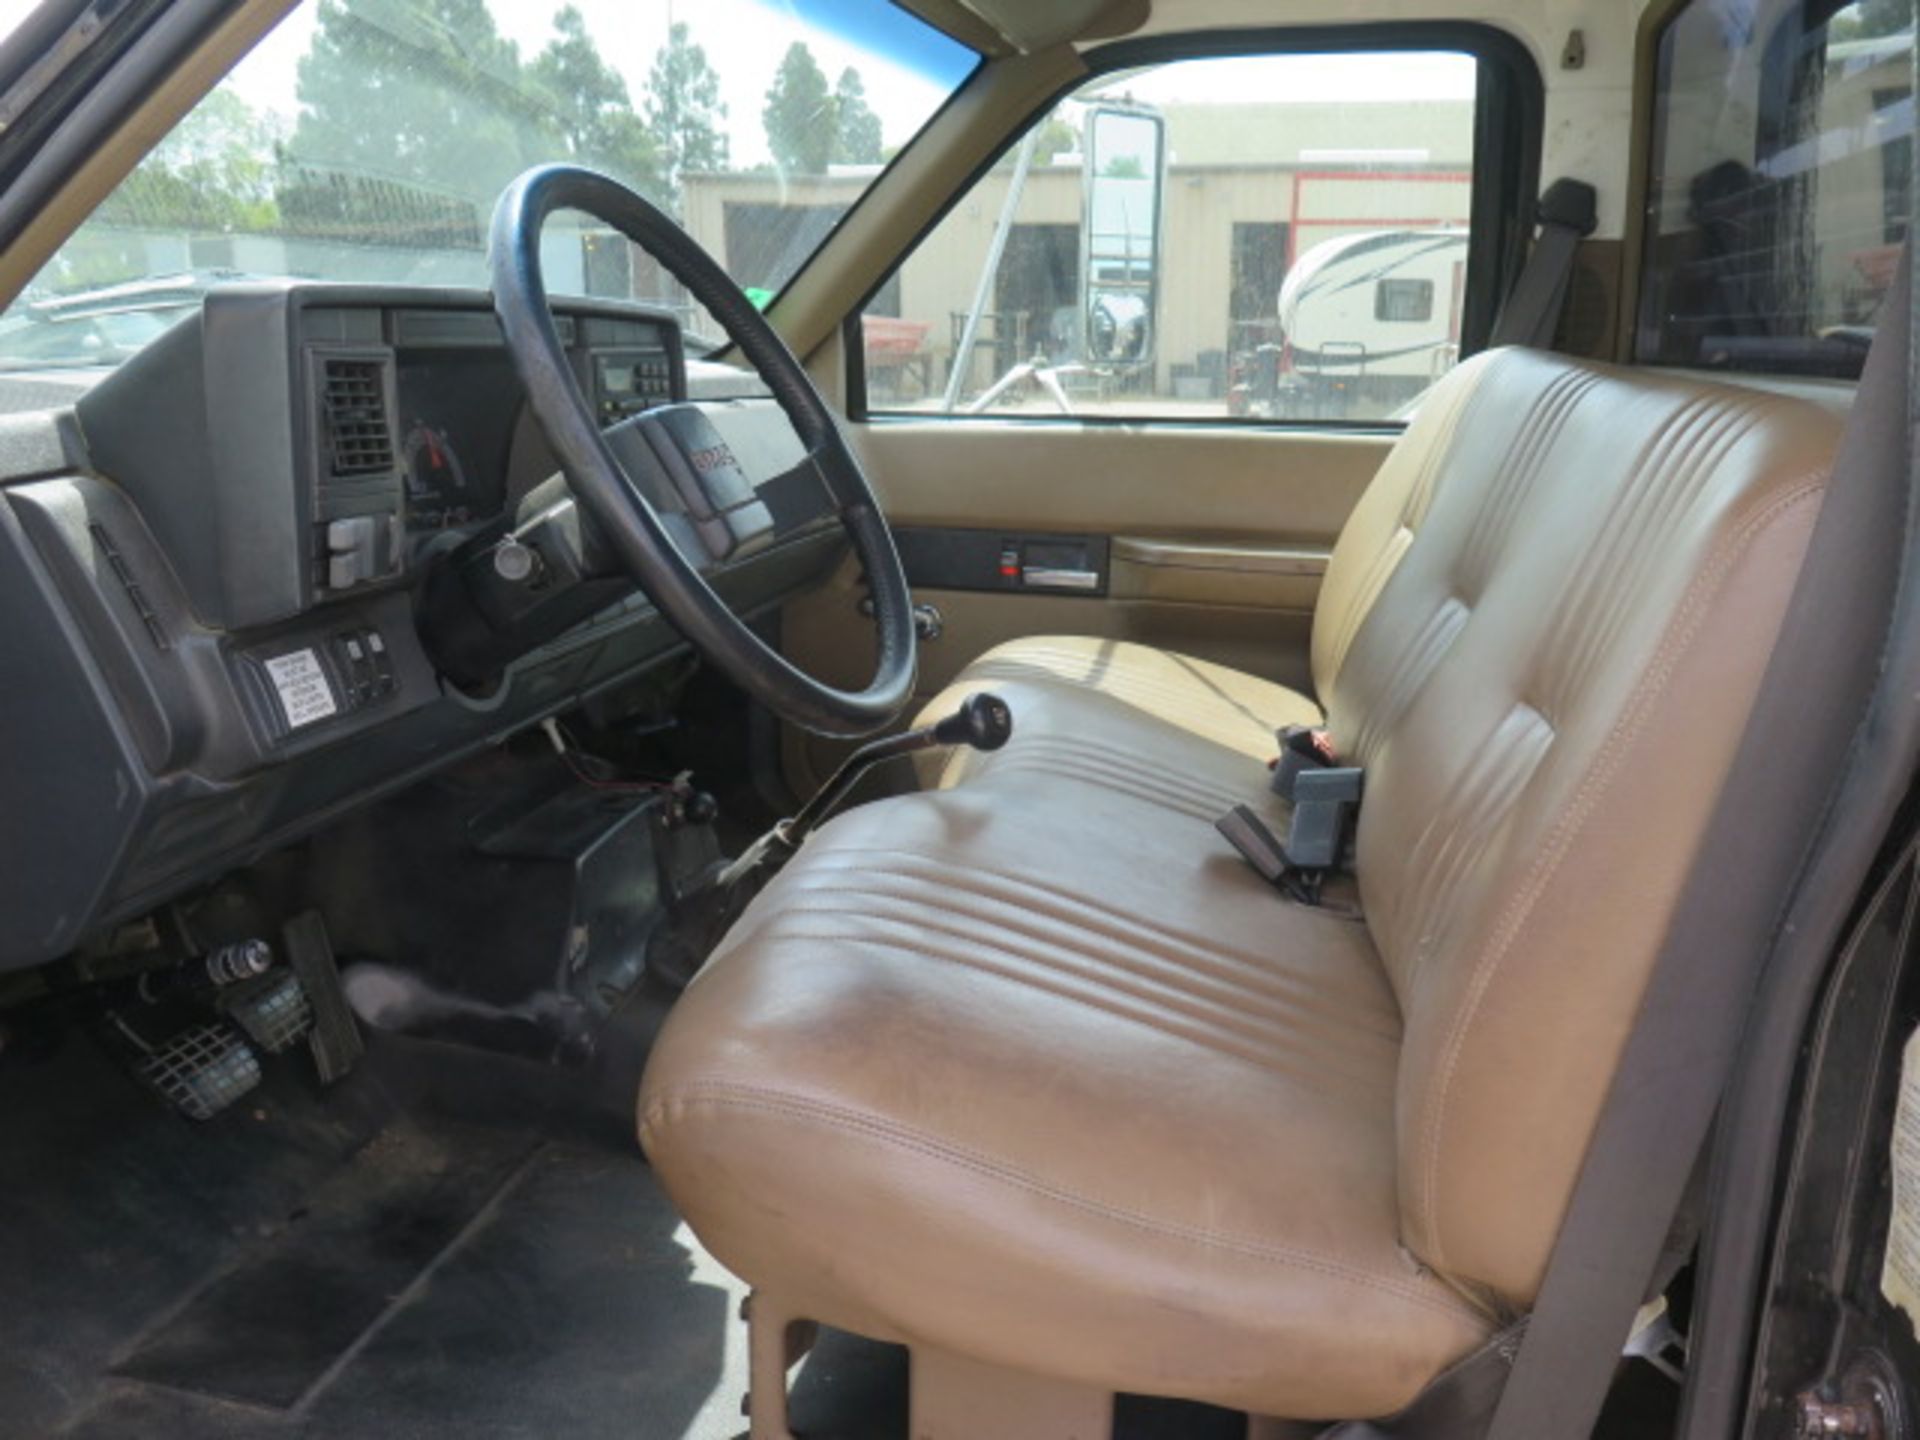 1998 GMC C5500 15’ Flatbed Truck Lisc# 7X17465 w/ 6.0L LPG Engine, 5-Speed Manual Trans, 26,000 - Image 9 of 20